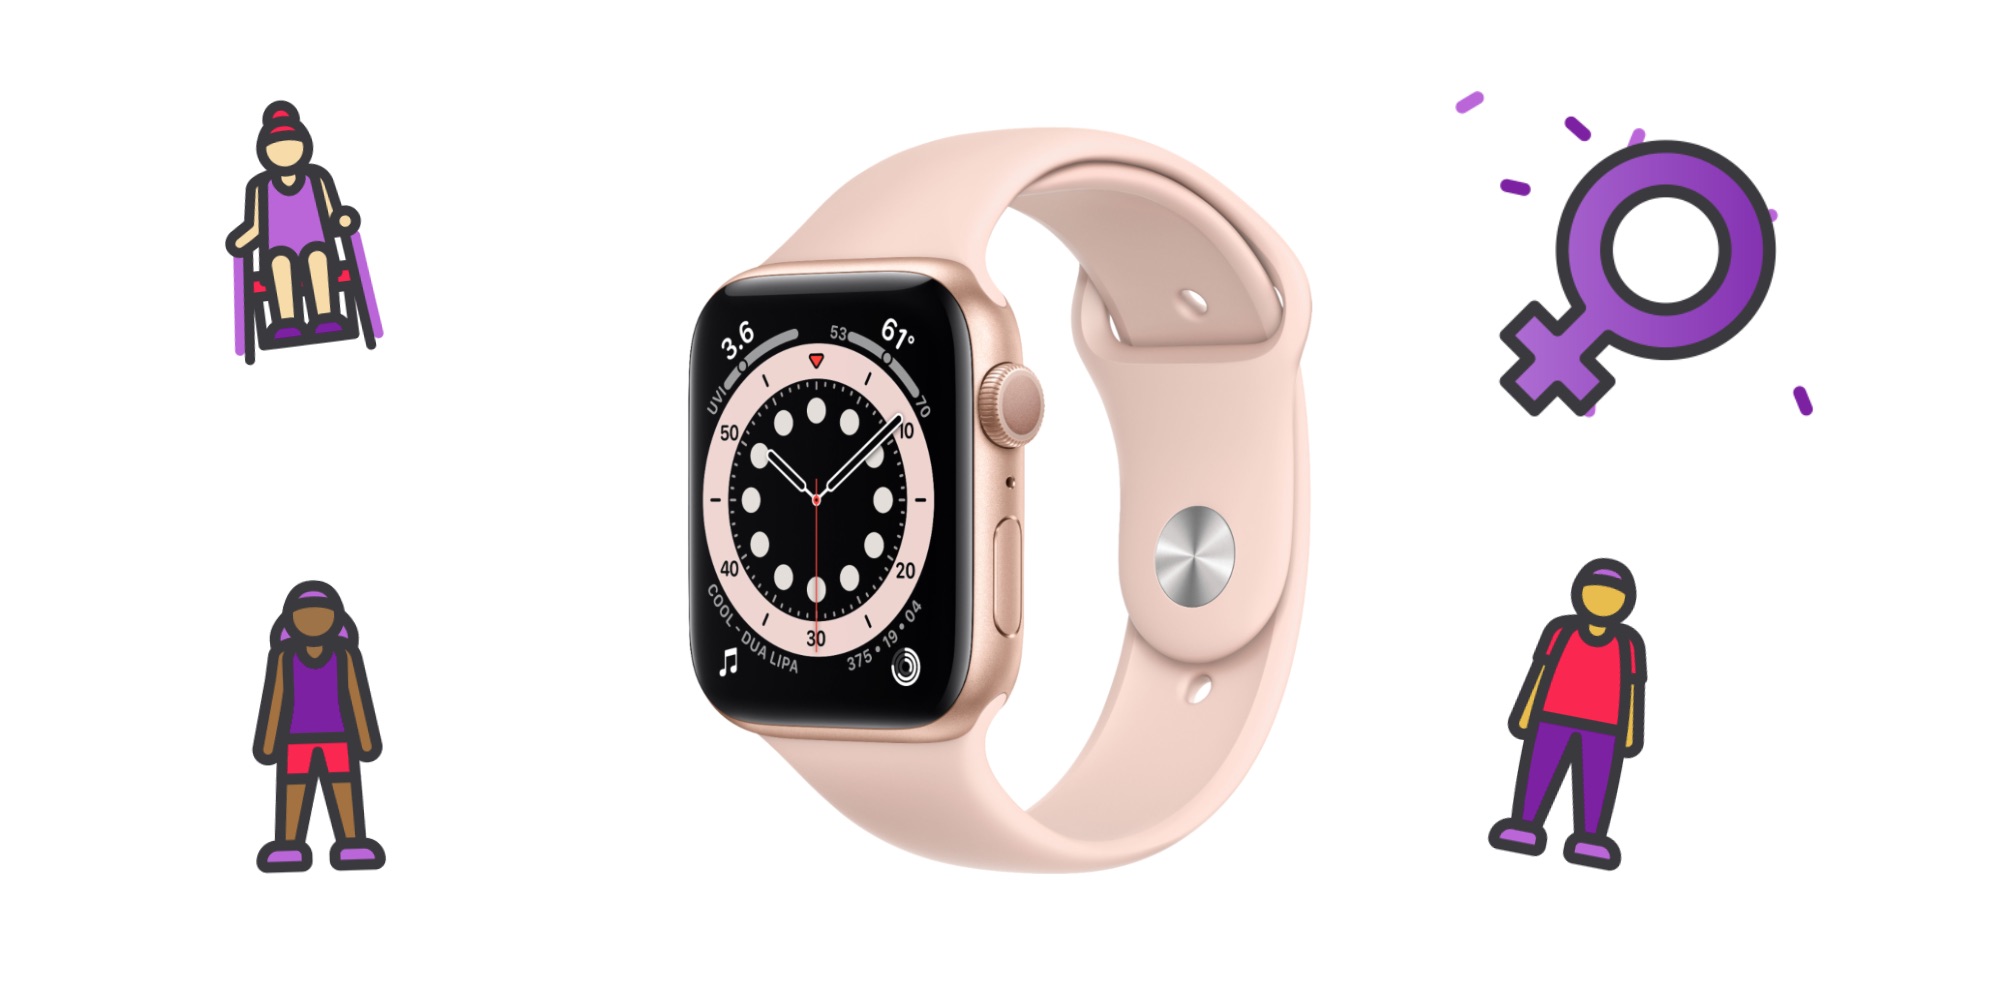 Apple Watch users can workout to unlock a virtual trophy on International Womens Day